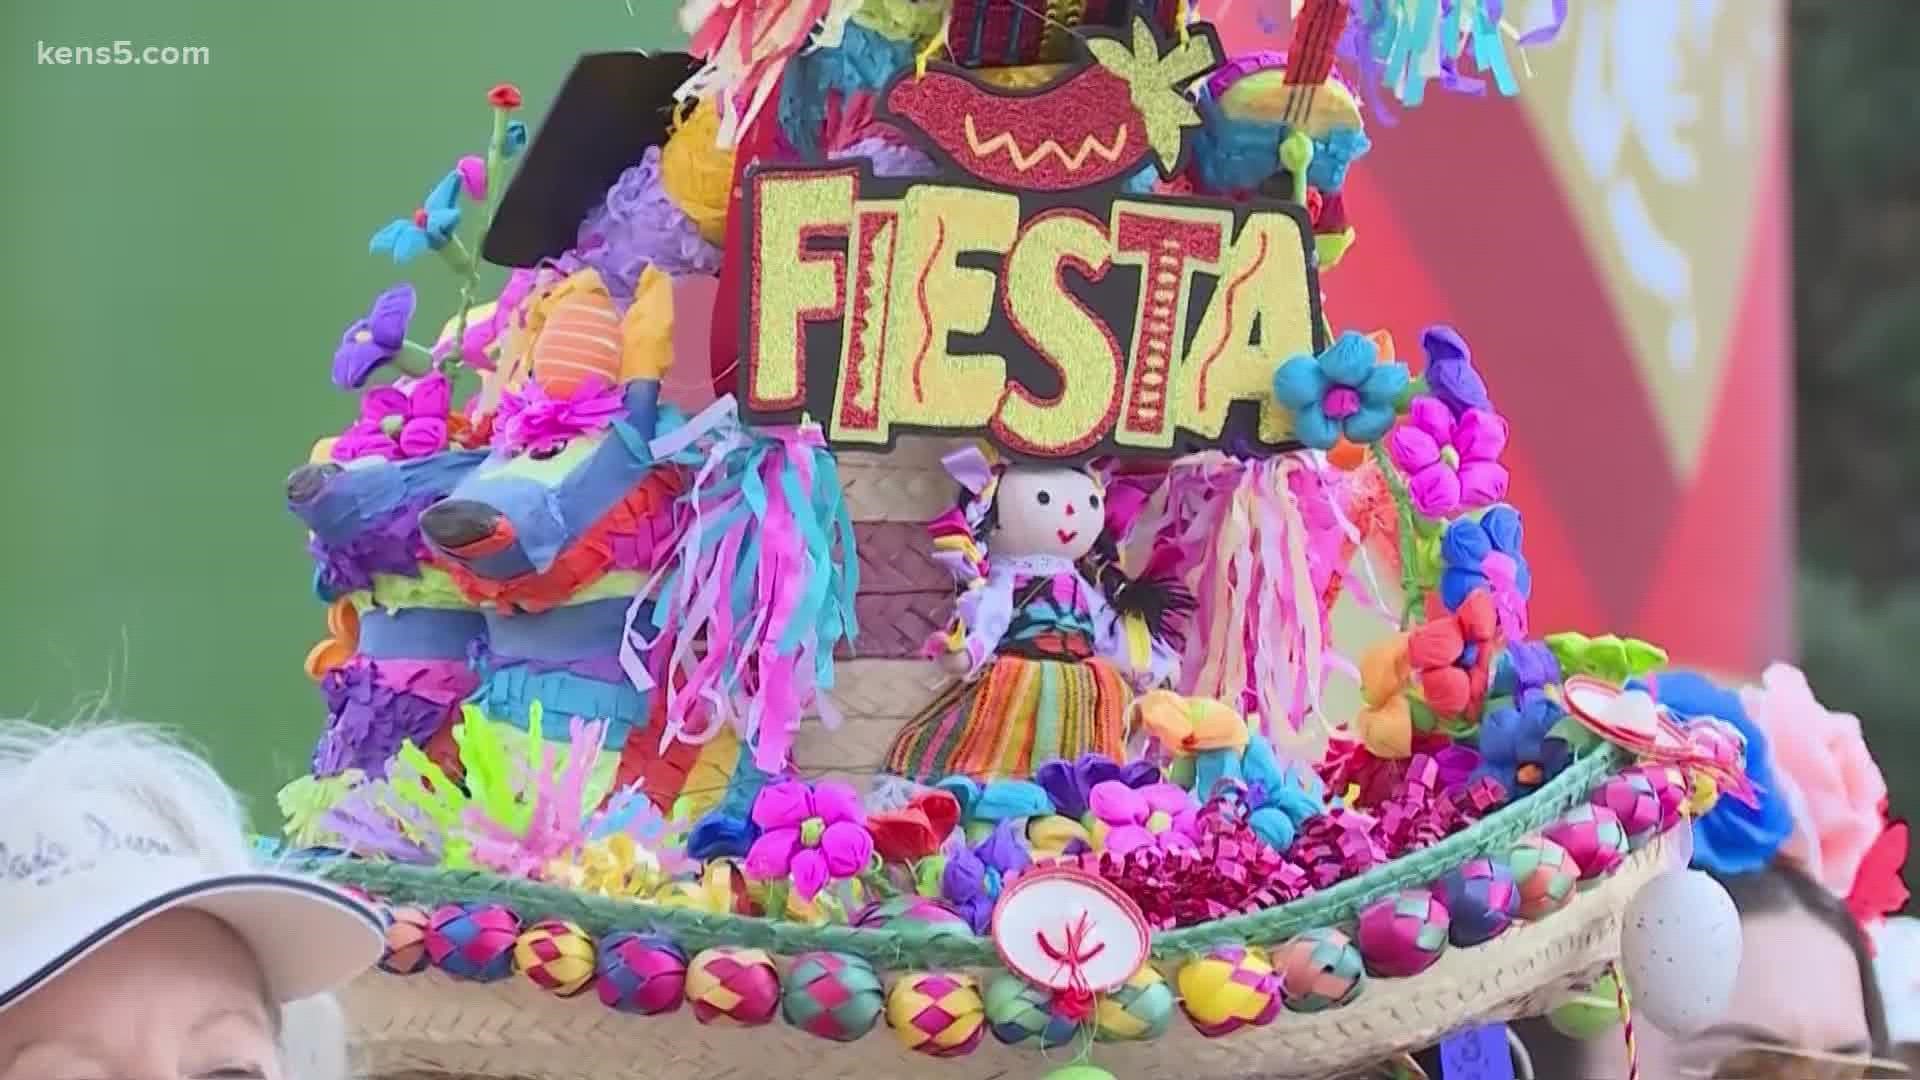 Fiesta schemers are already trying to steal all the fun.